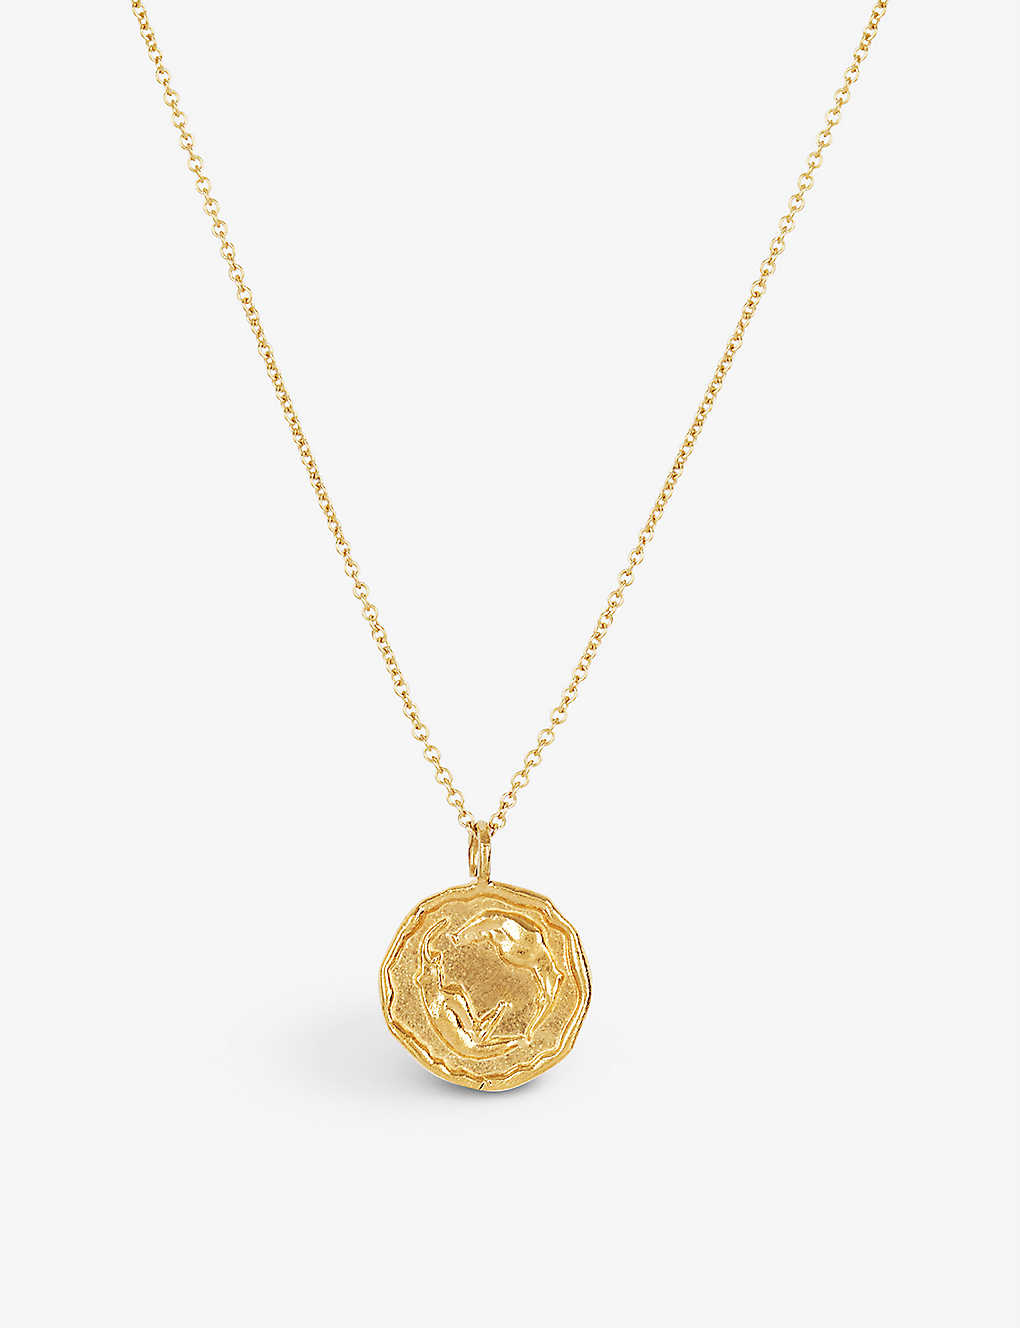 La Maison Couture Deborah Blyth Espoir 18ct Yellow Gold-plated Recycled Brass Necklace